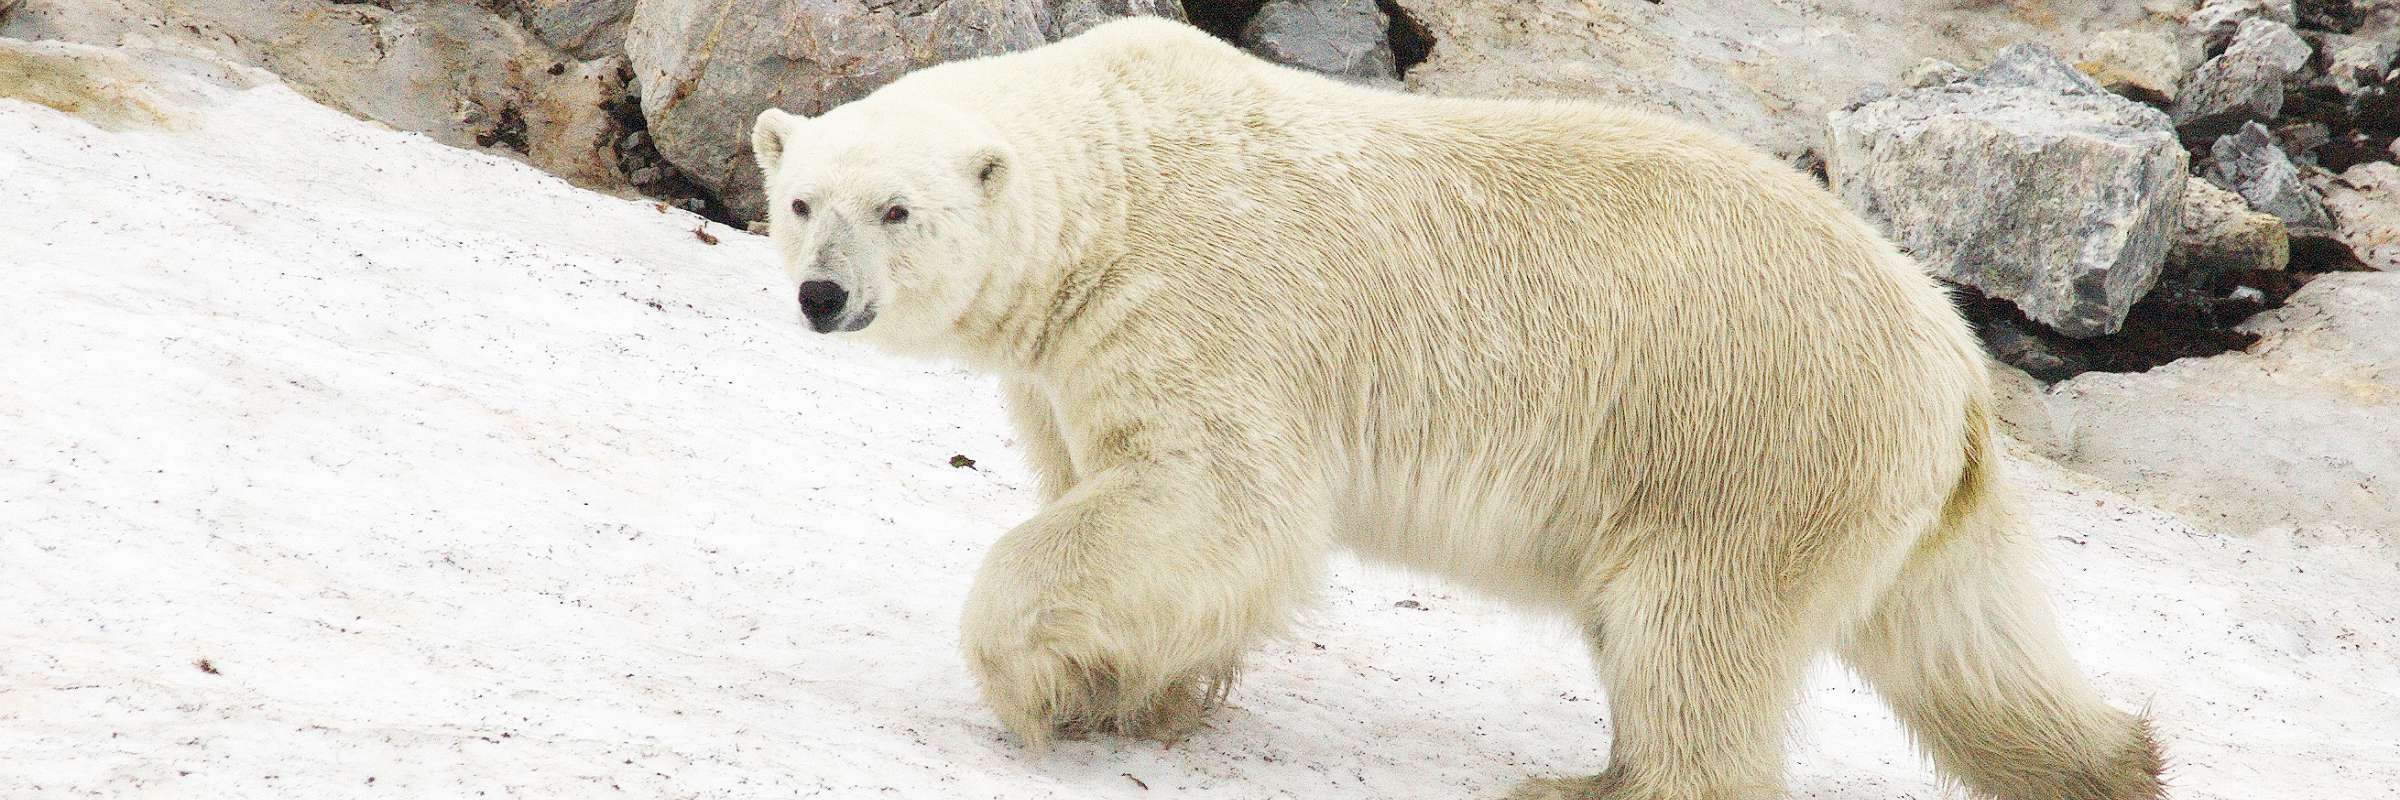 Polar Bears in Svalbard: Where to See Them & What's Being Done to ...